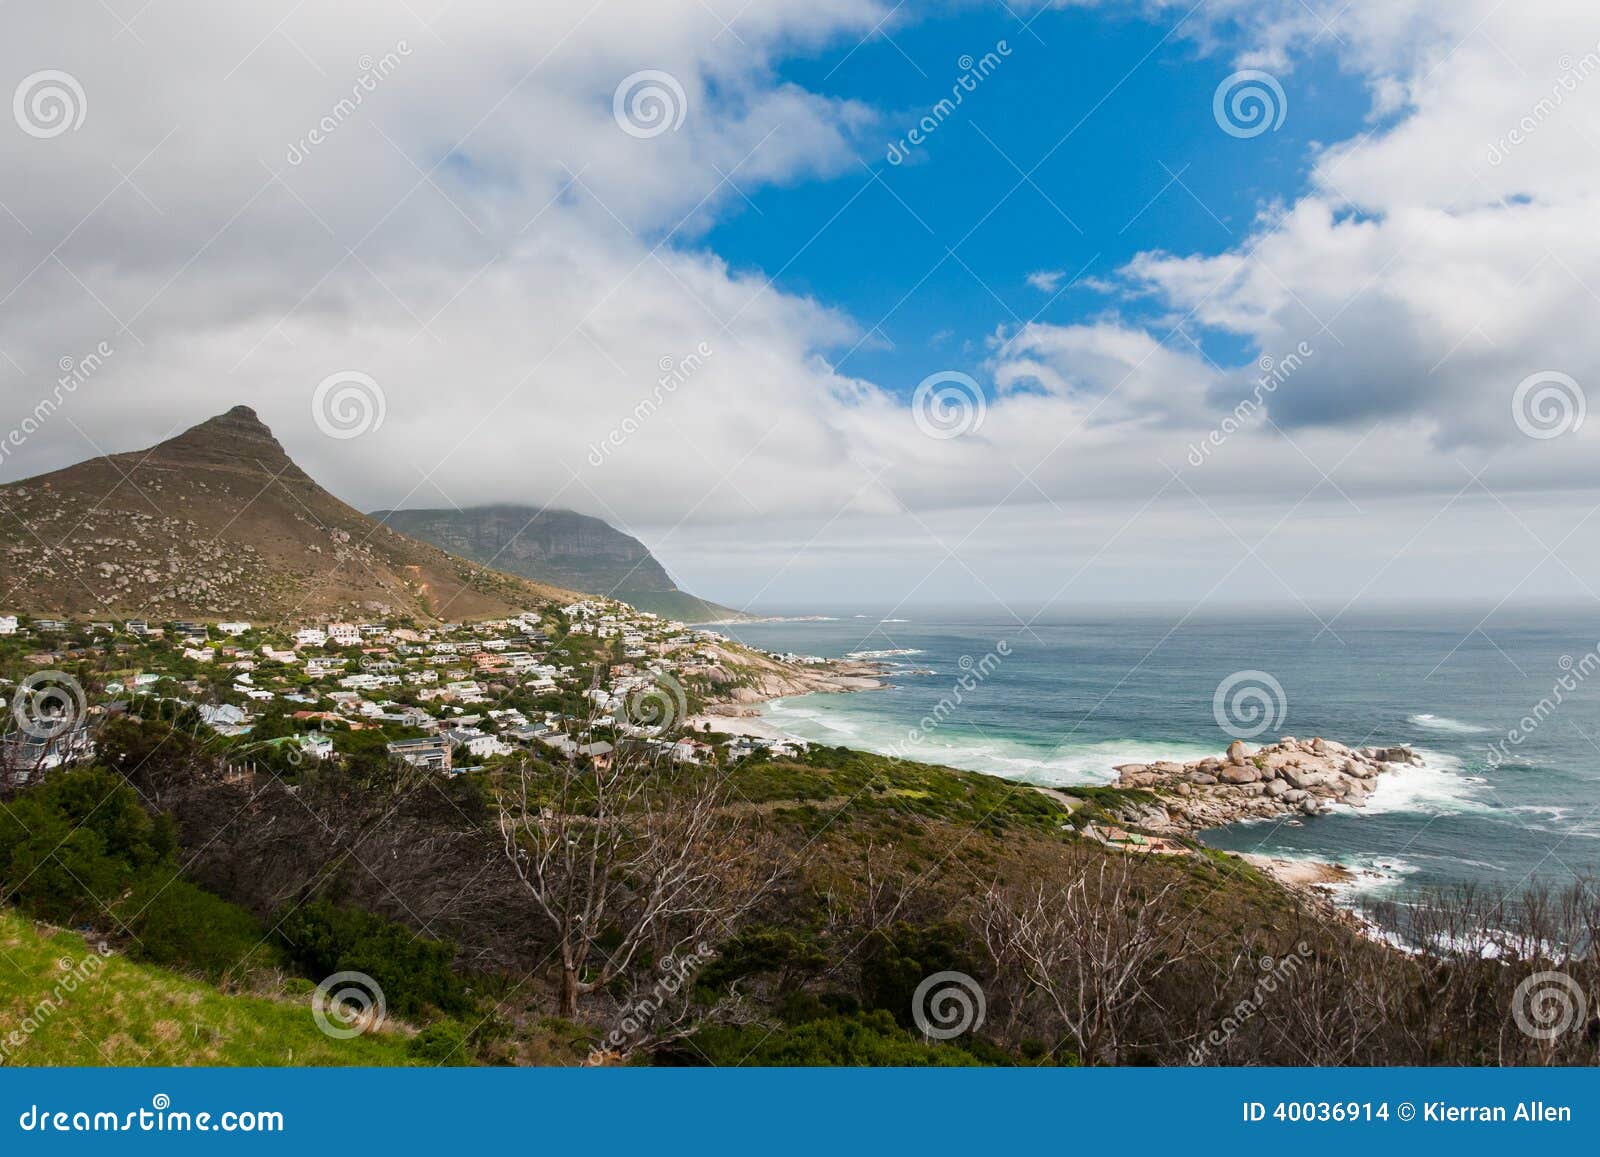 capetown south africa